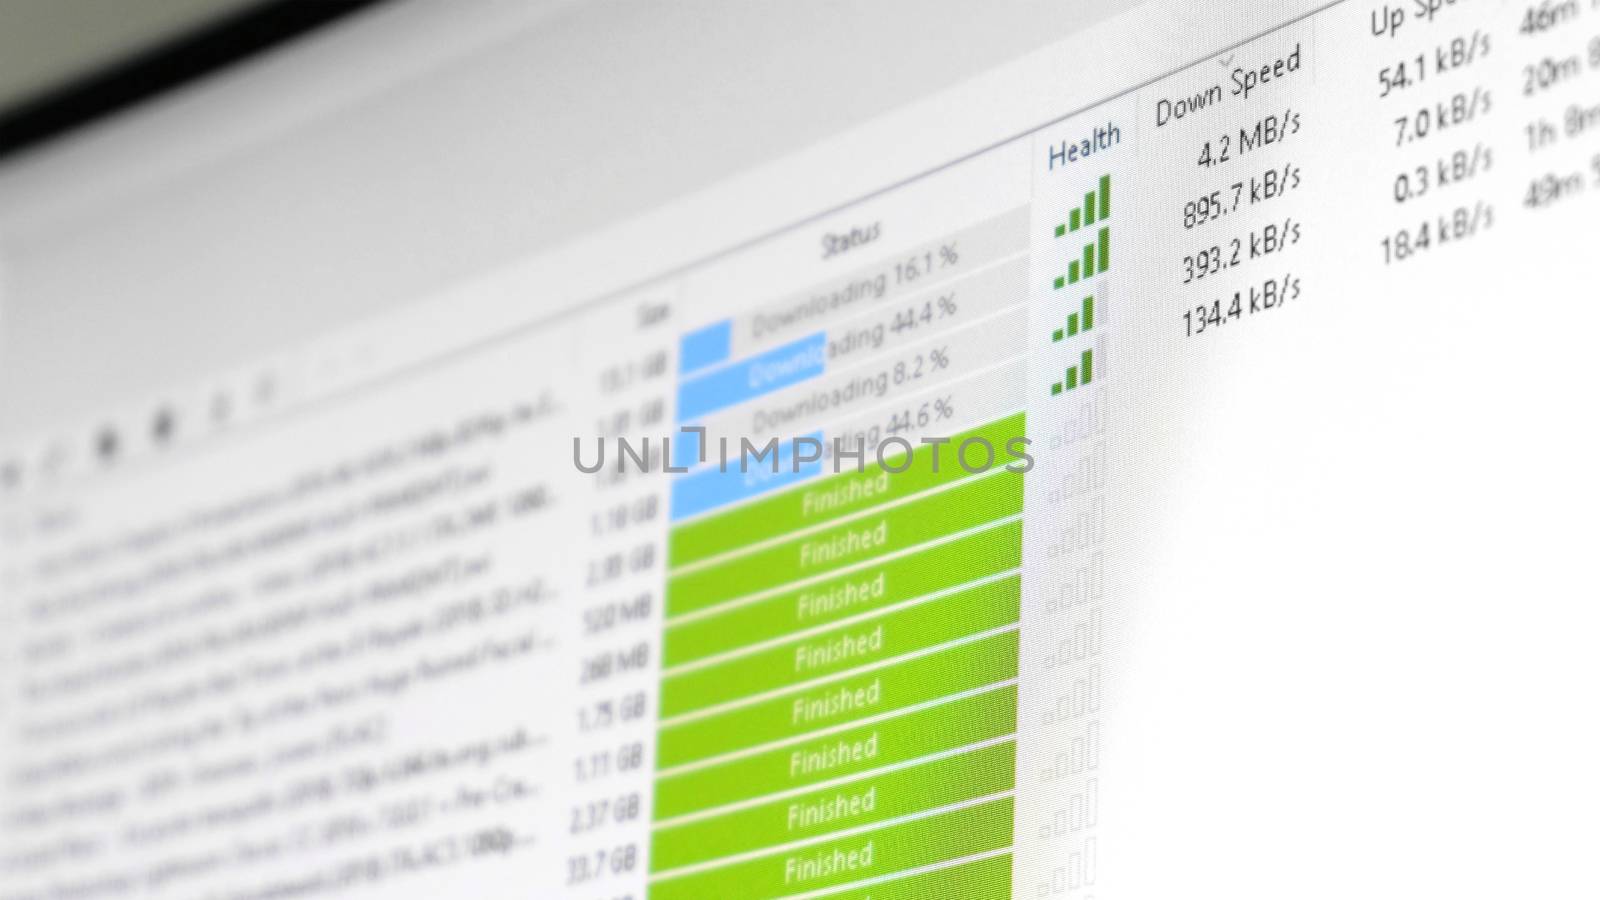 torrent download speed - software client is downloading multiple files by LucaLorenzelli